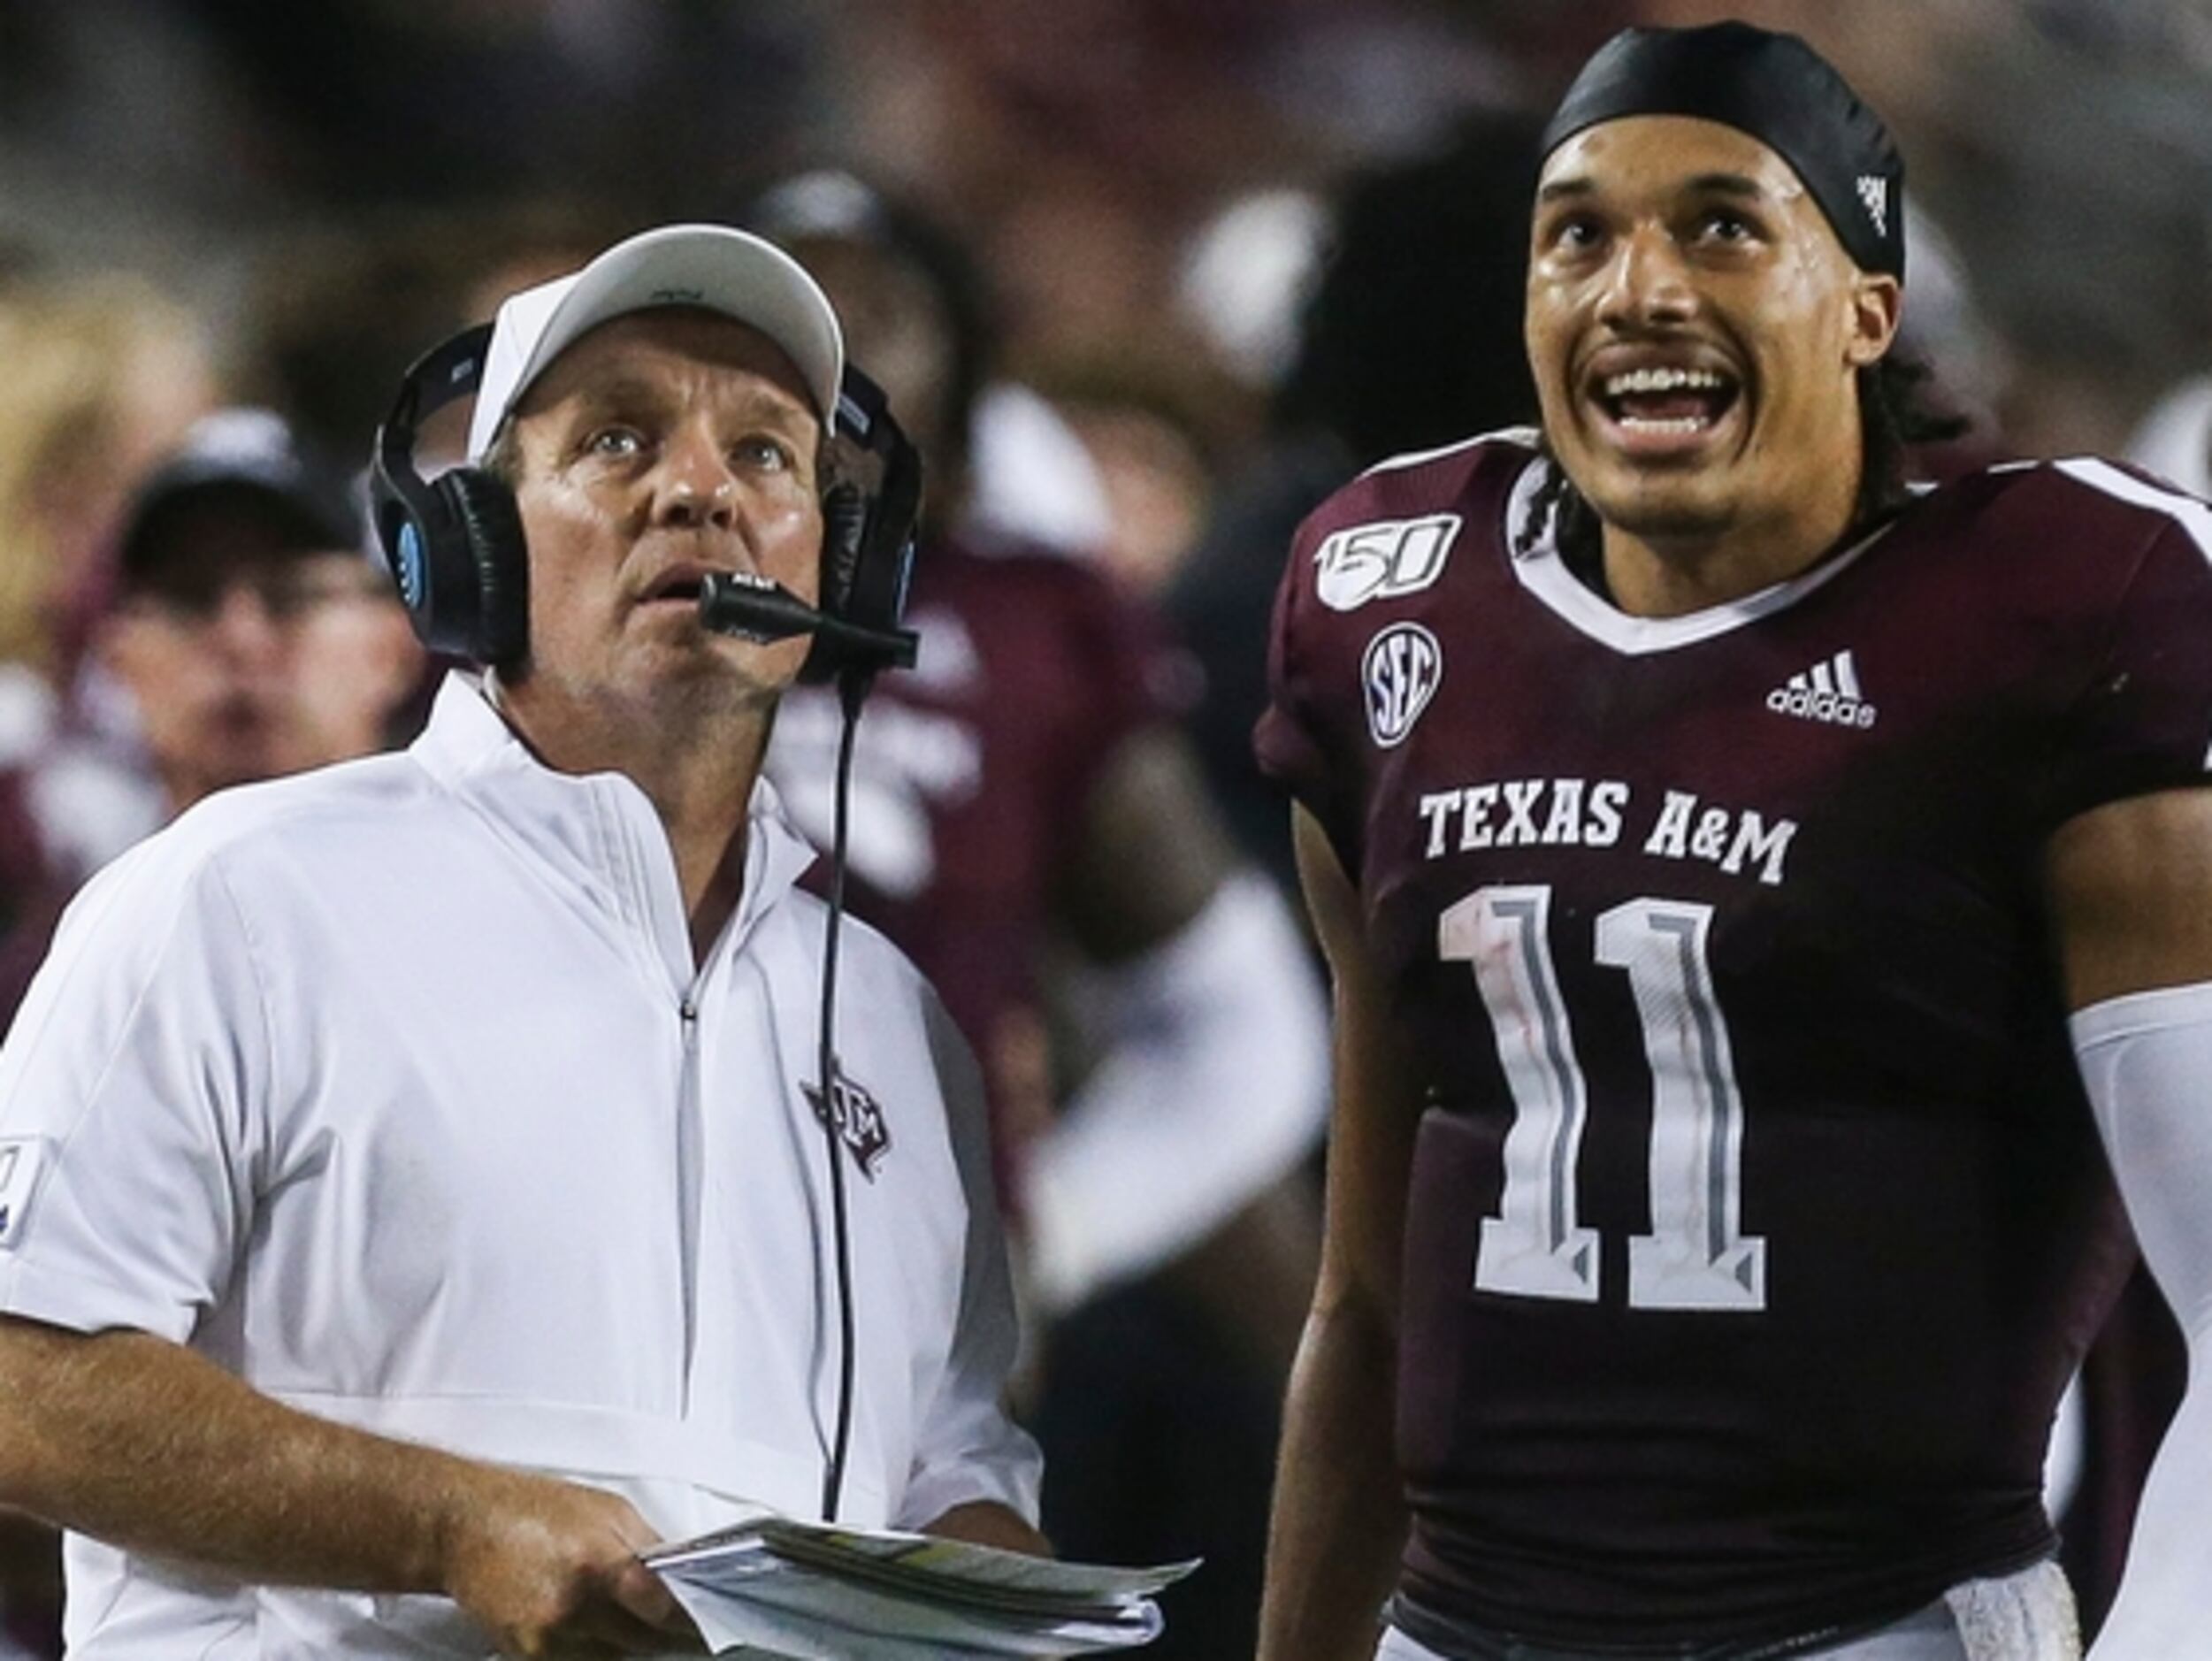 Ole Miss football vs. Texas A&M: Score prediction, scouting report